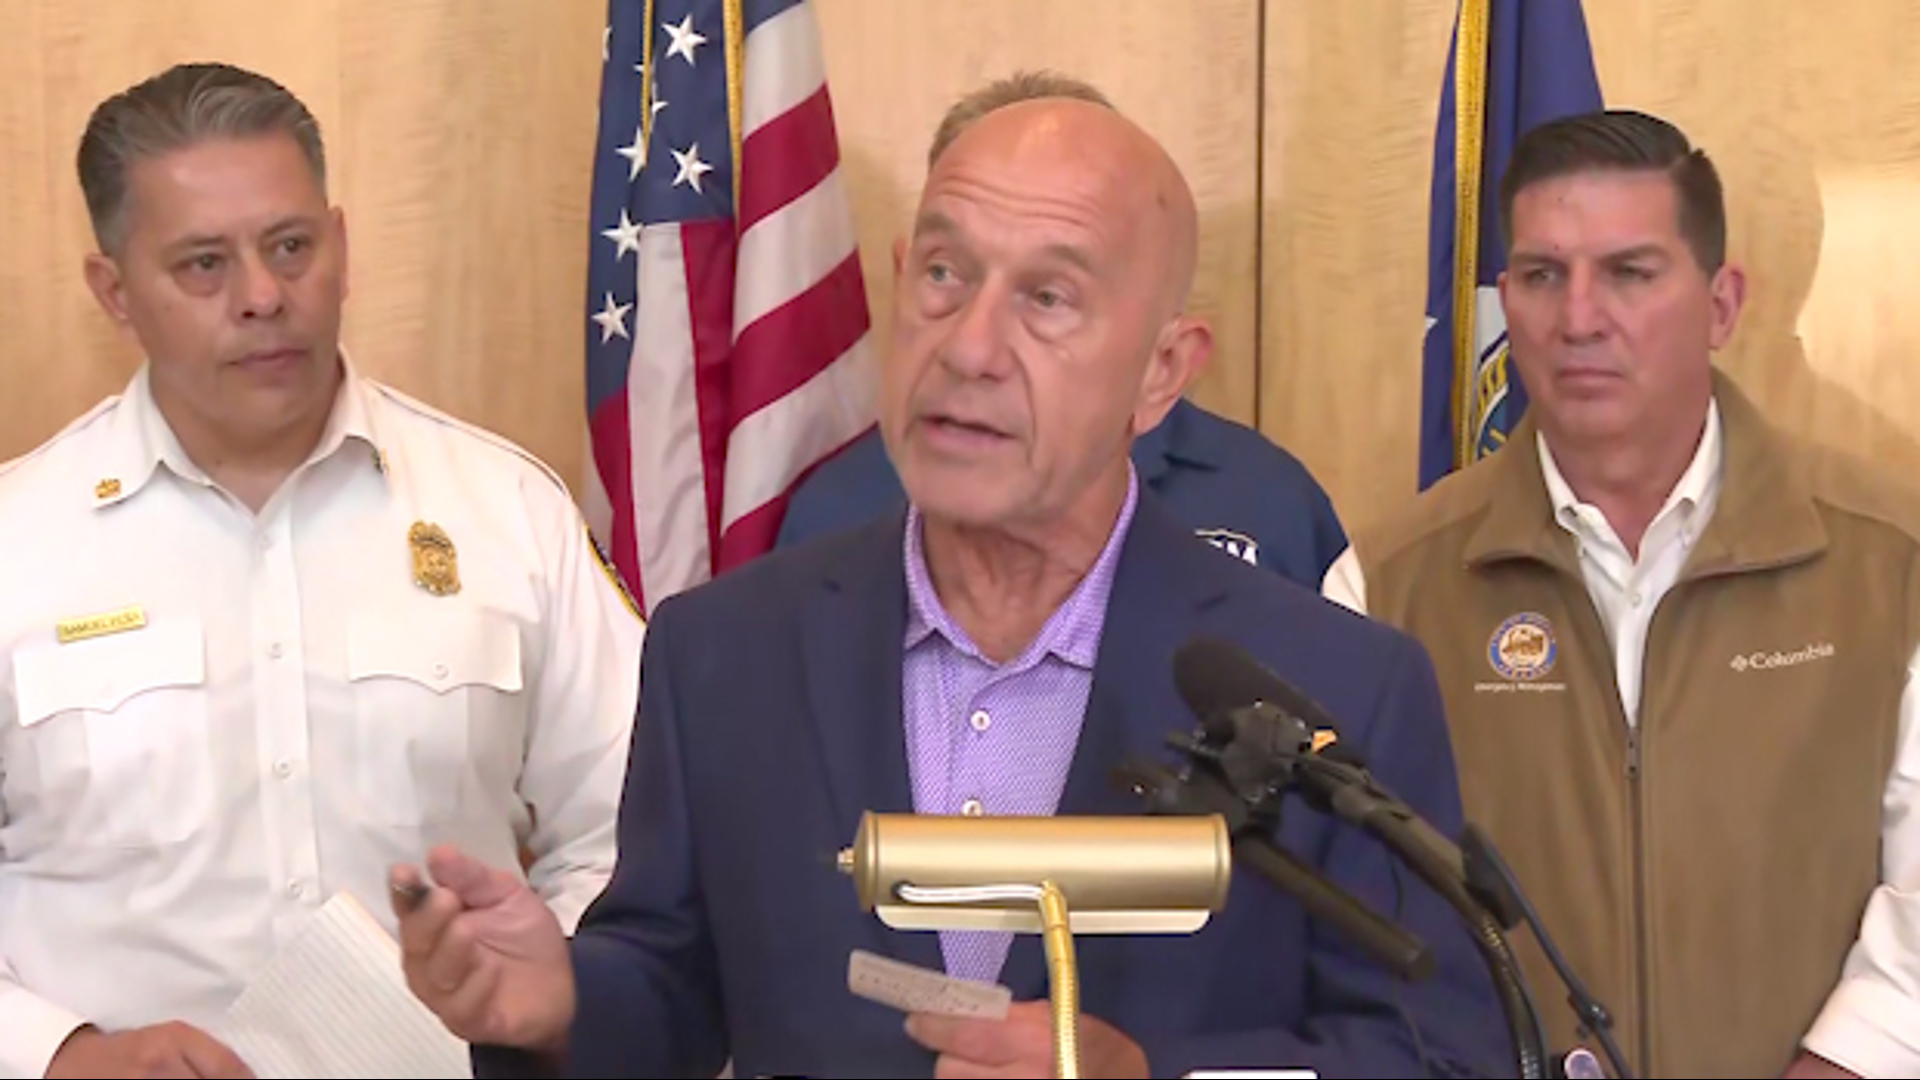 During the news conference, Mayor Whitmire took aim at an assisted living facility and we learned of a carbon monoxide death.